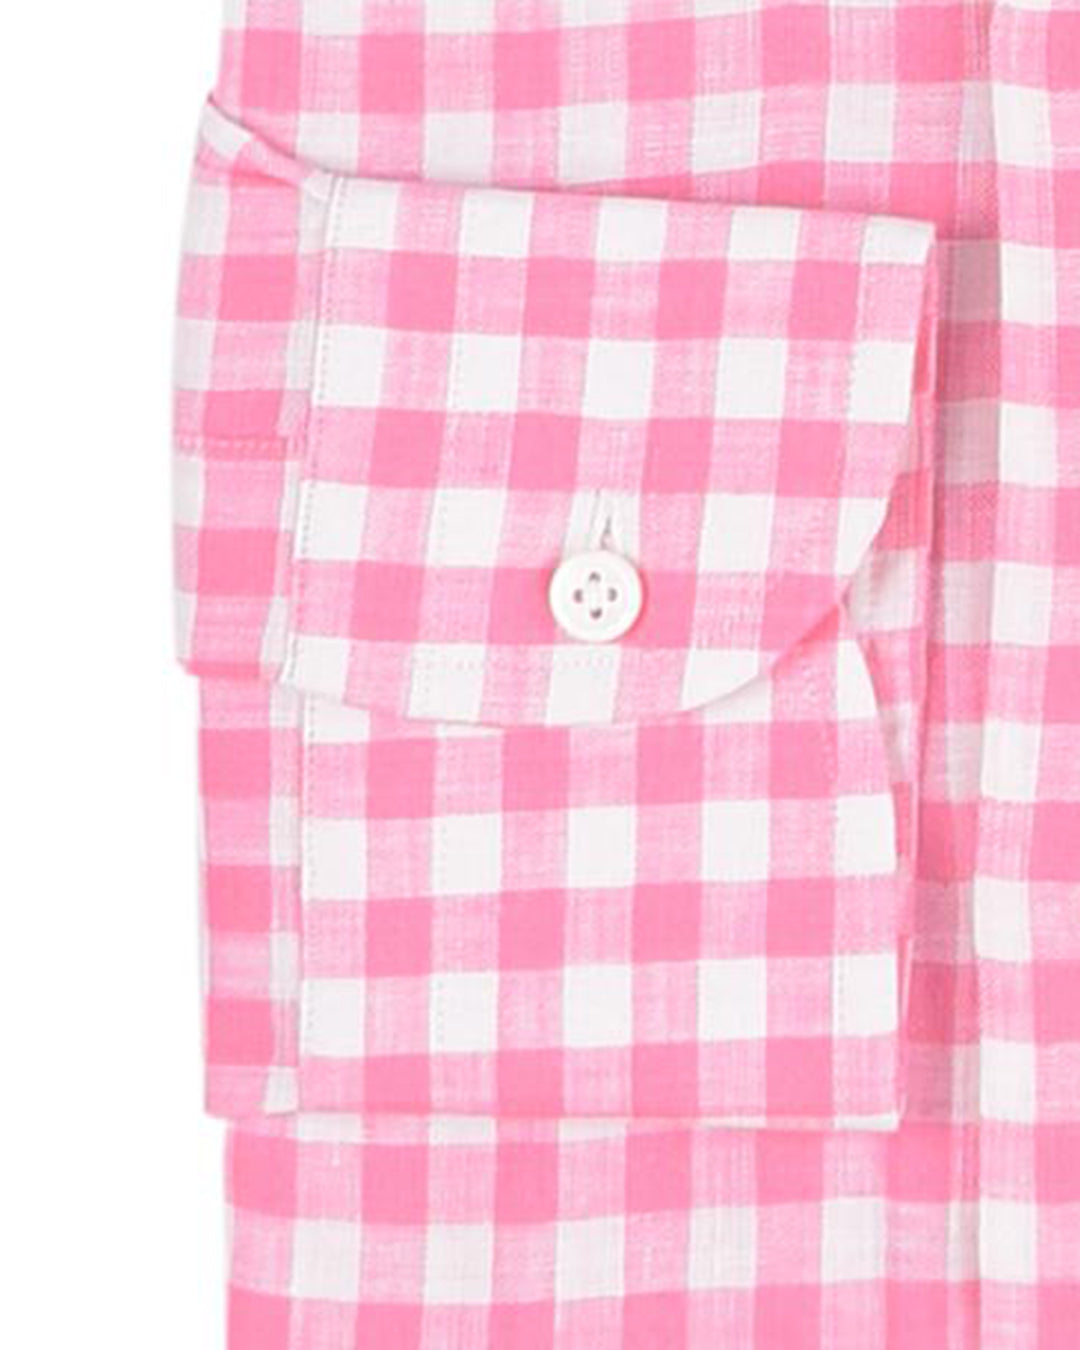 Cuff of the custom linen shirt for men in pink gingham by Luxire Clothing